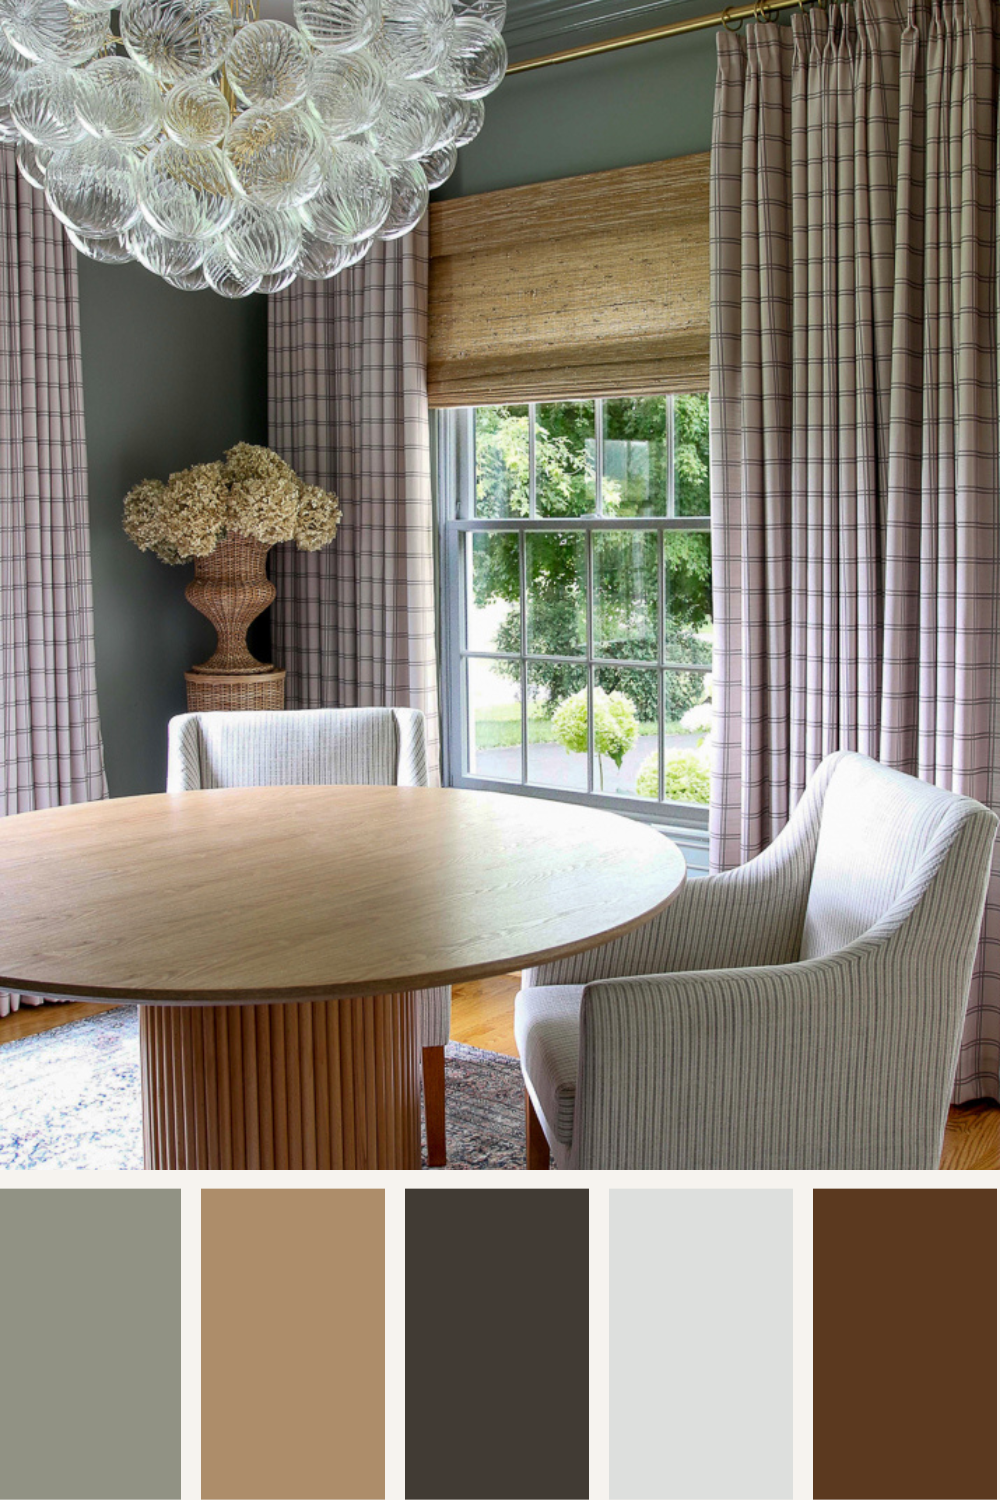 home office with fall color palette, BM storm cloud gray walls, Stefana Silber x Two Pages windowpane drapes, woven roman shade, round pedestal table in center of room with striped linen chairs, rattan pedestal and urn with dried hydrangeas